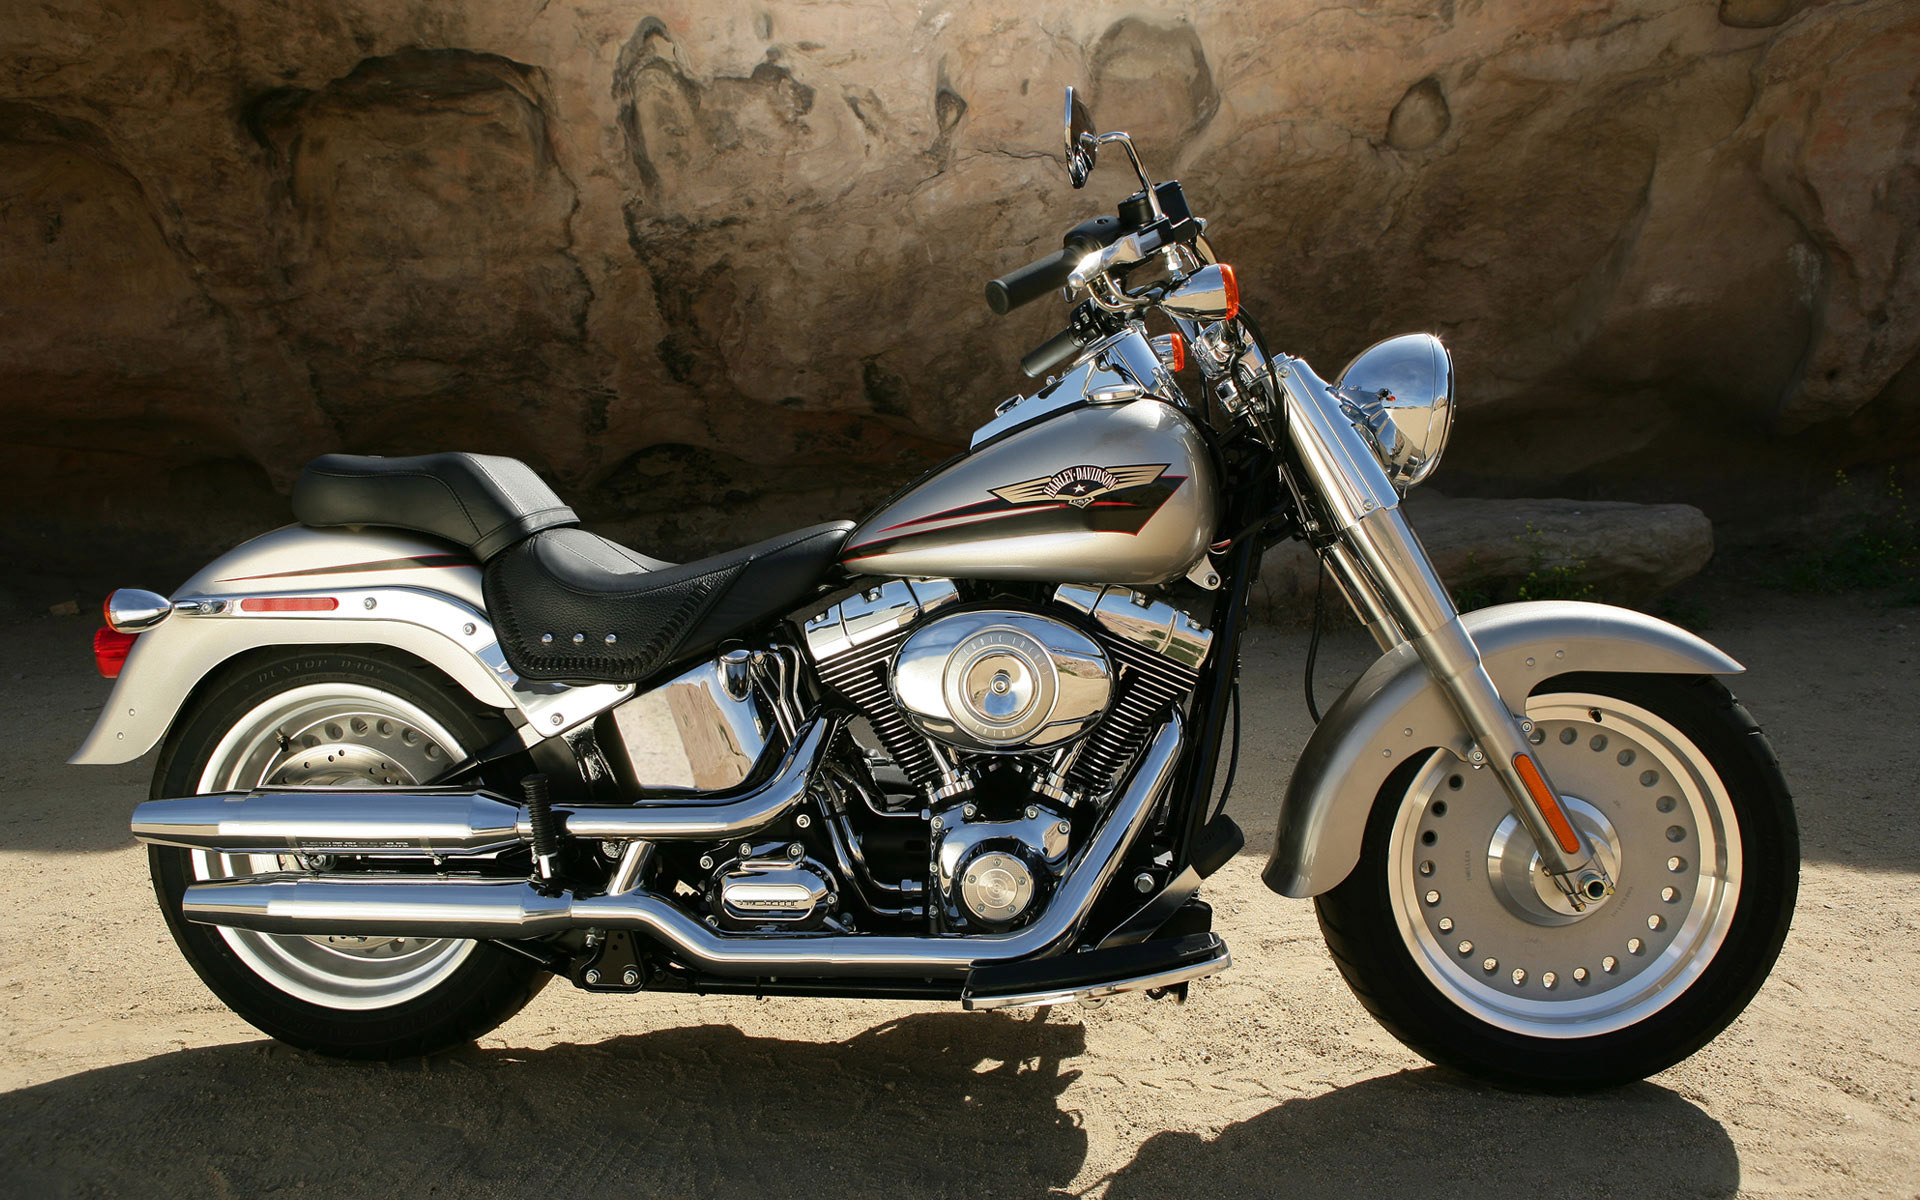 Download this Harley Davidson Widescreen Wallpaper picture